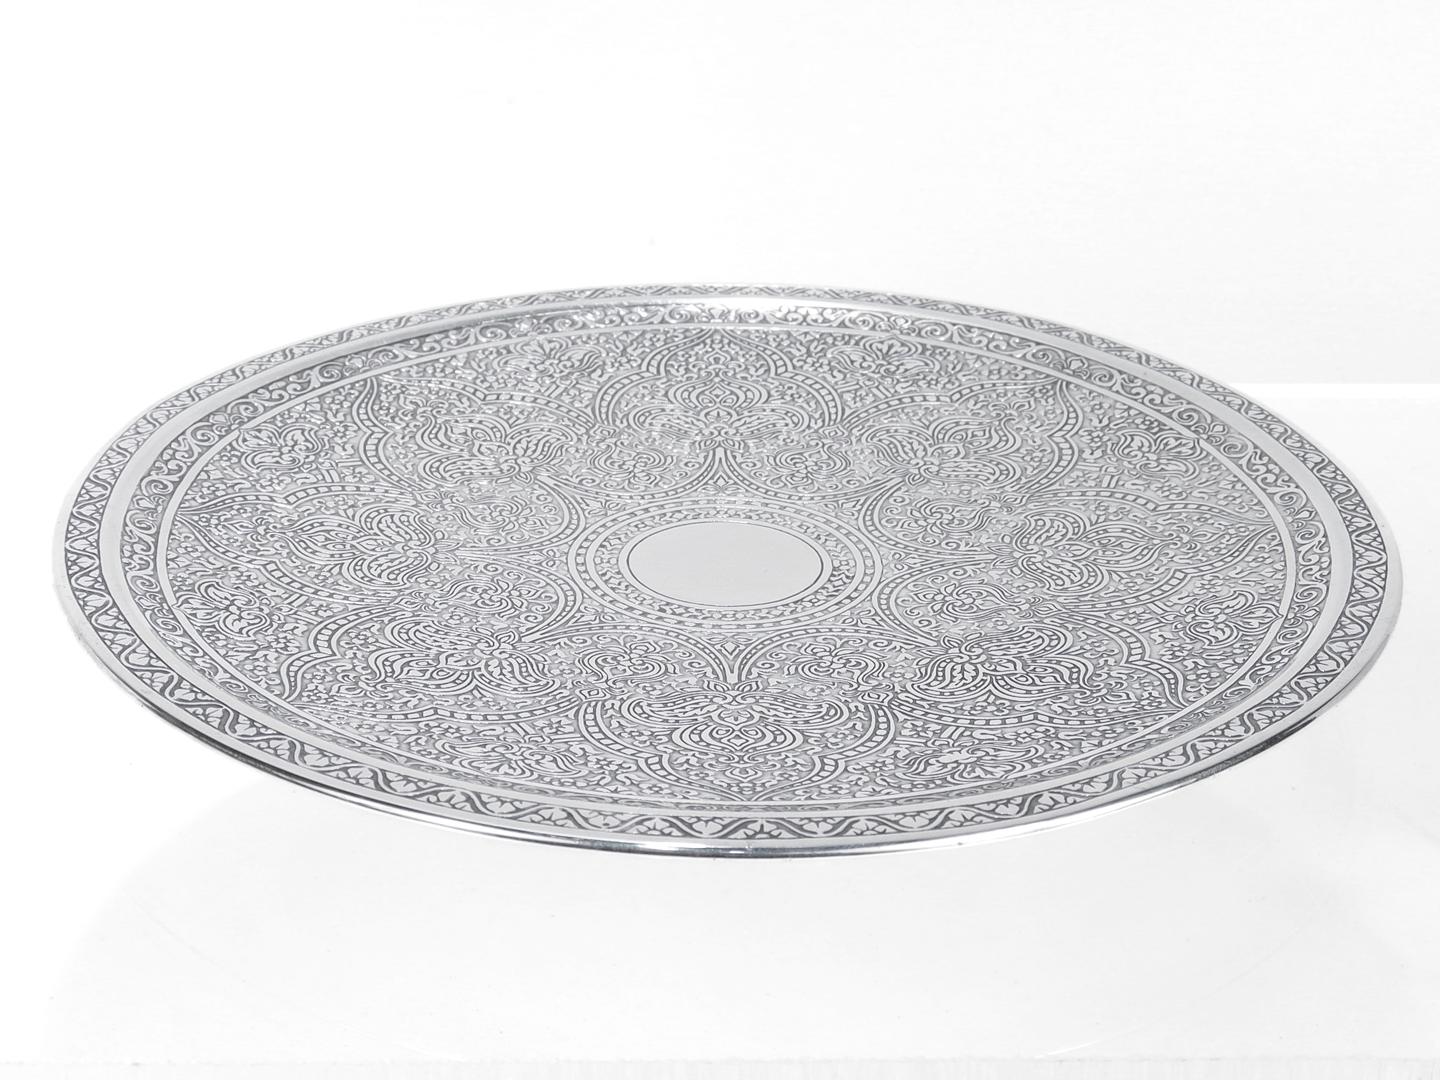 A fine cake stand or footed serving tray.

By Tiffany & Co.

In sterling silver.

With a Persian pattern or Islamic style ornate acid-etched design.

Fully hallmarked to the reverse.

Simply wonderful Tiffany design!

Date:
Early 20th